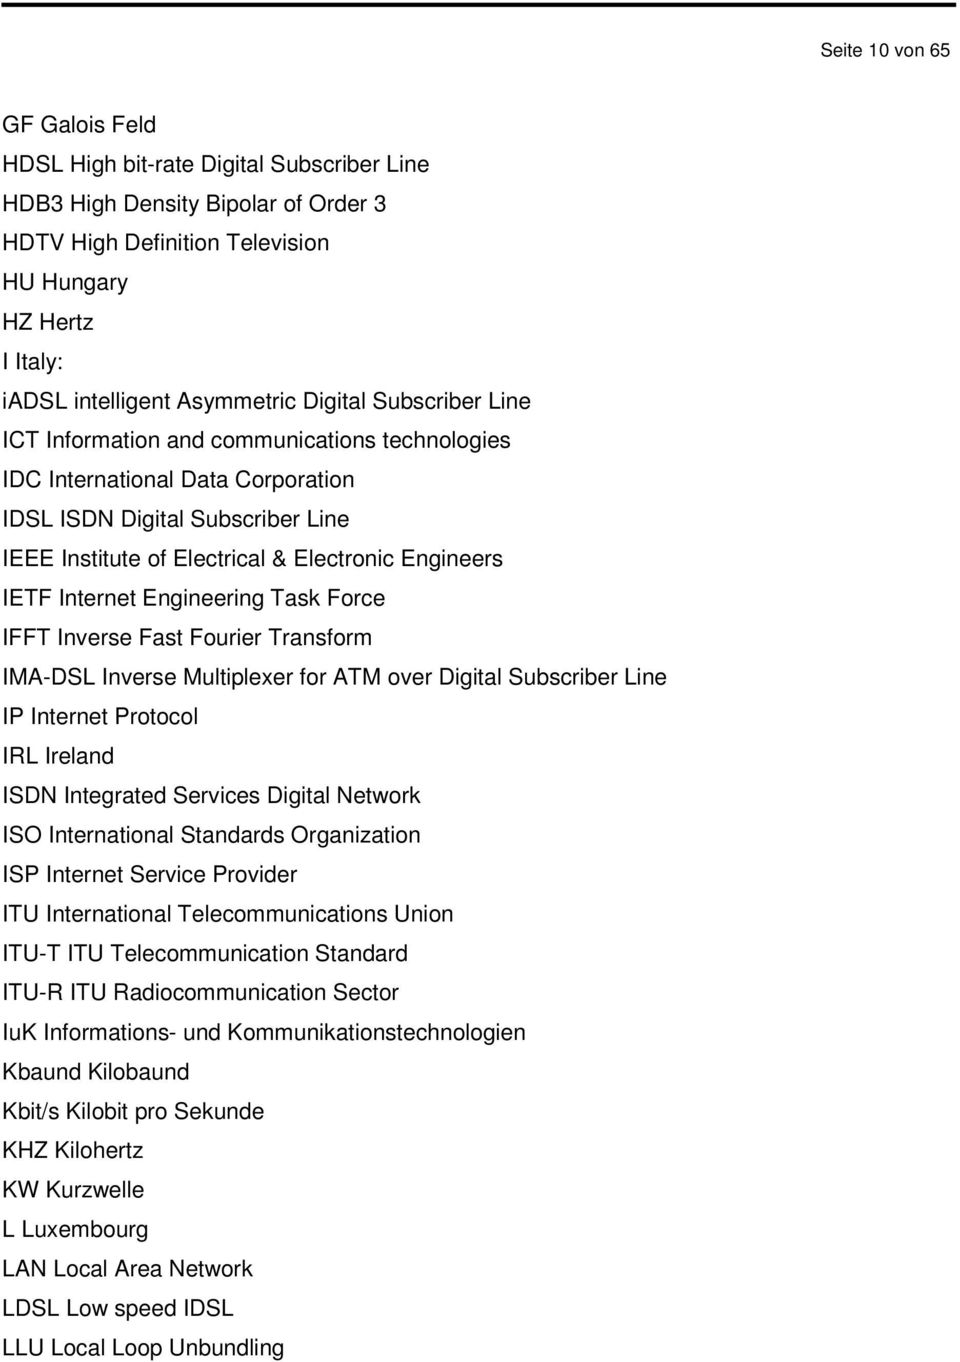 Engineers IETF Internet Engineering Task Force IFFT Inverse Fast Fourier Transform IMA-DSL Inverse Multiplexer for ATM over Digital Subscriber Line IP Internet Protocol IRL Ireland ISDN Integrated